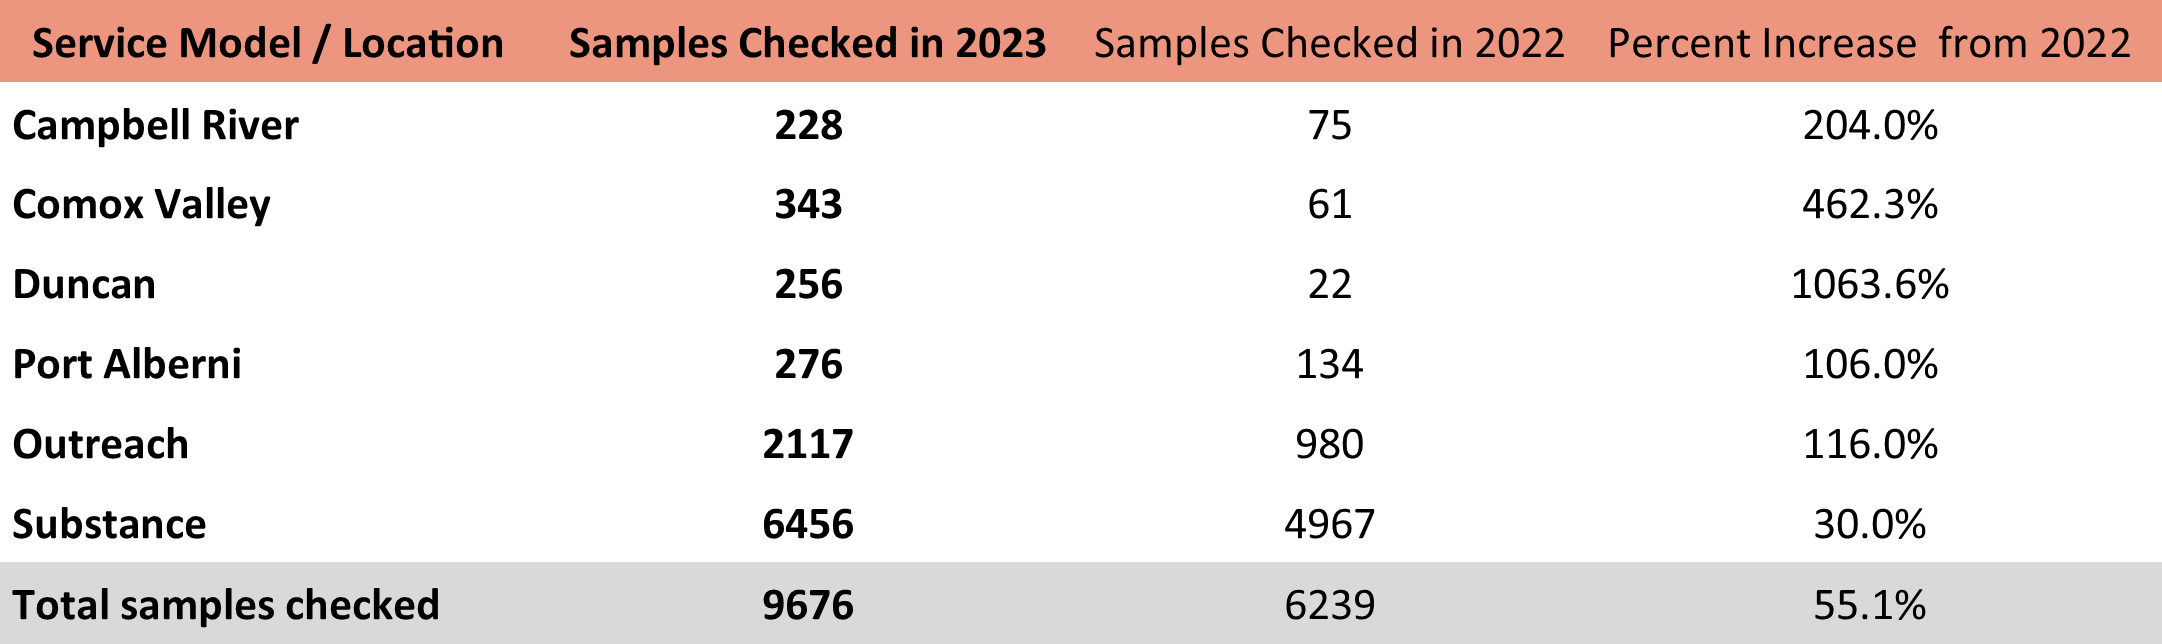 Table 1. Number of samples checked and percent increase by service location.